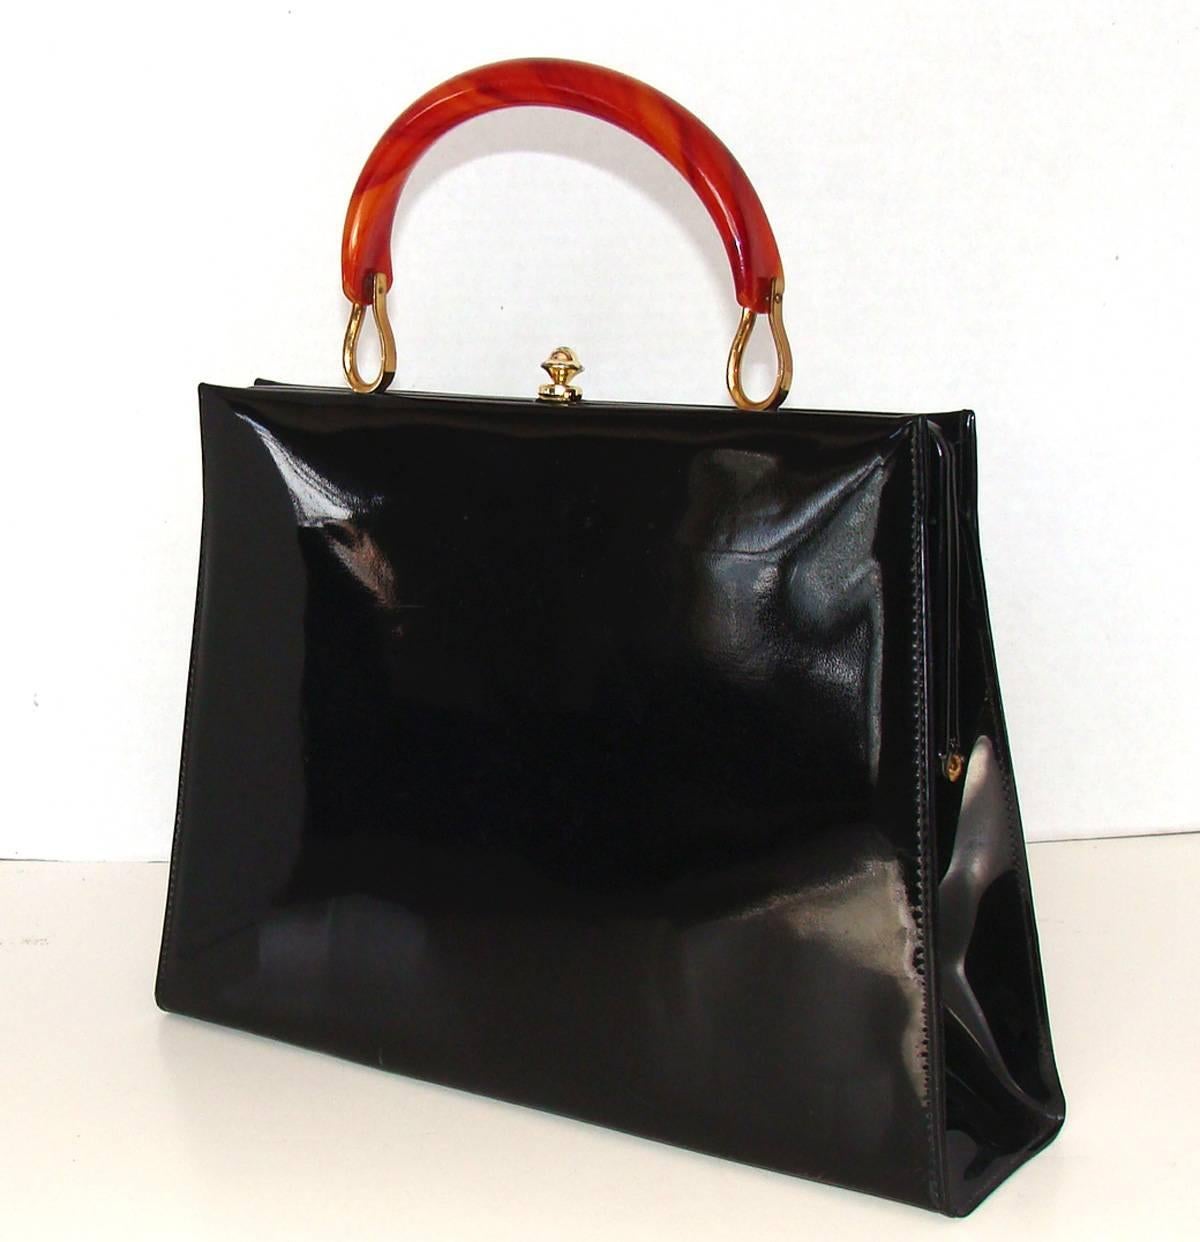 Timeless and classic patent kelly bag with tortoise style lucite handle mounted with stylish brass mounts.  

This spacious bag is practical and is good for dress and casual from NYC to LA.  

It is in nice vintage condition, with no issues, showing